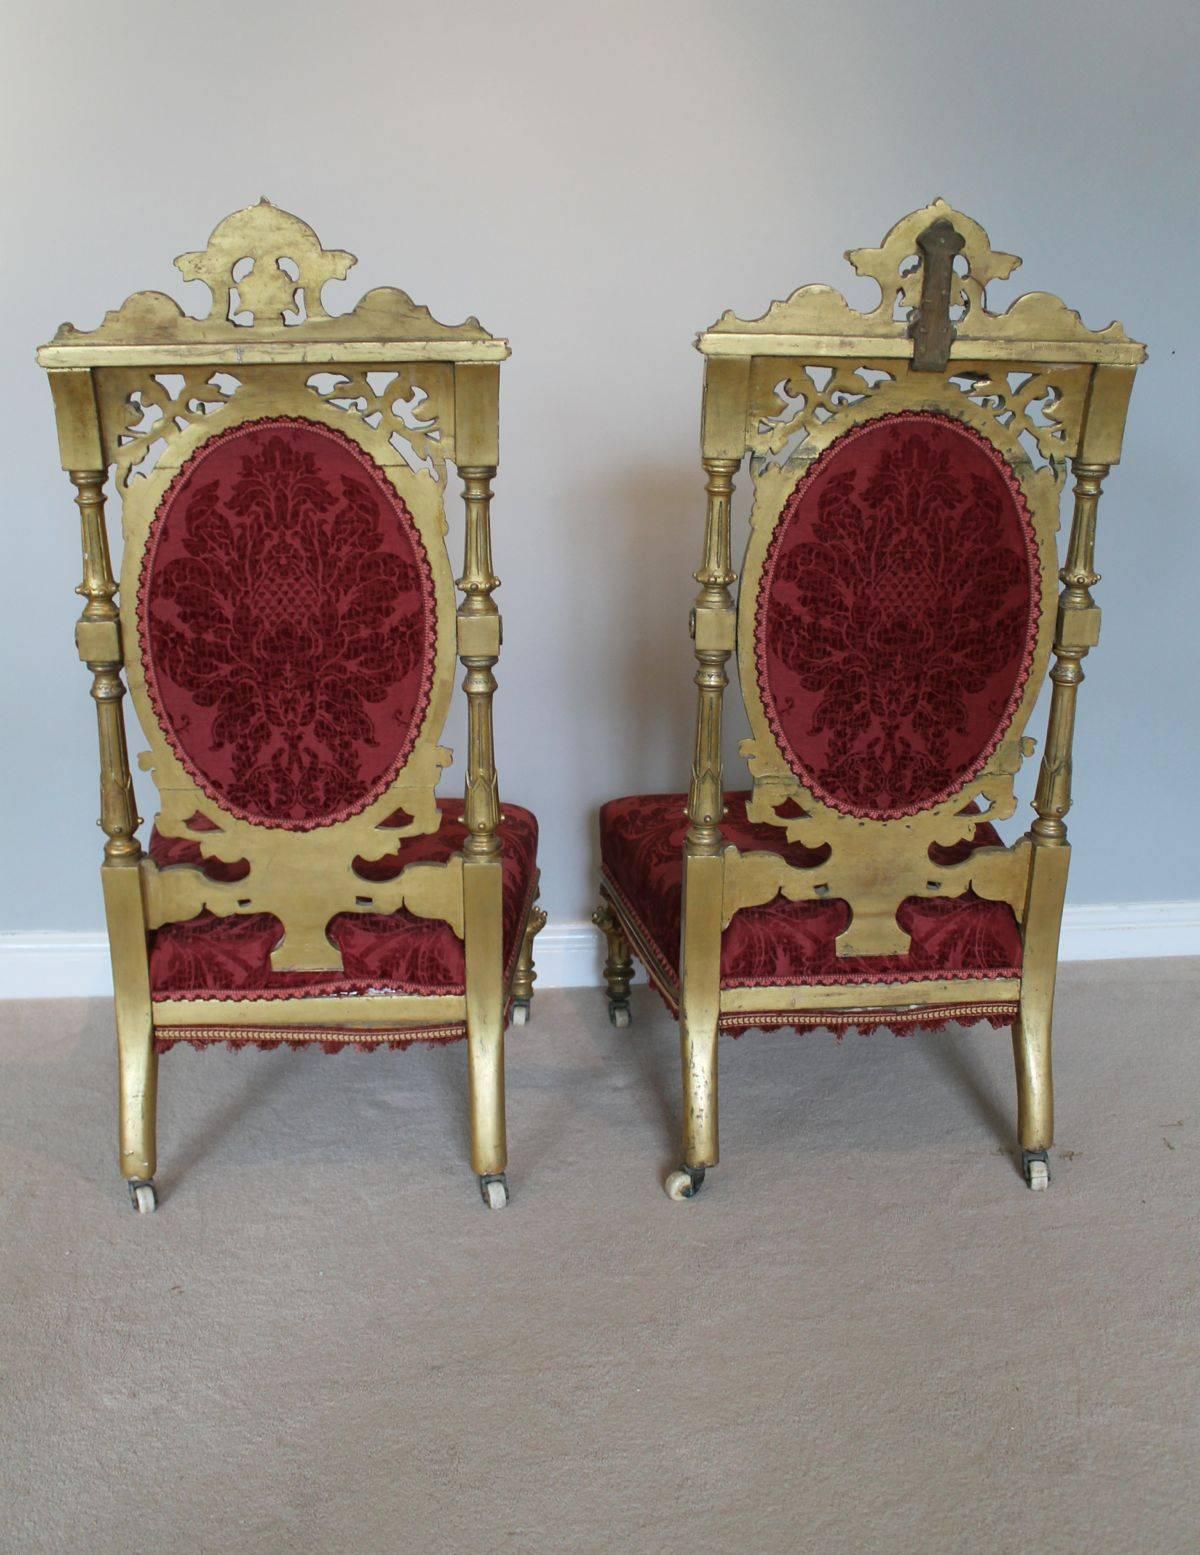 Upholstery 19th Century Pair of Aesthetic Movement Carved Wood and Gilt Chairs For Sale